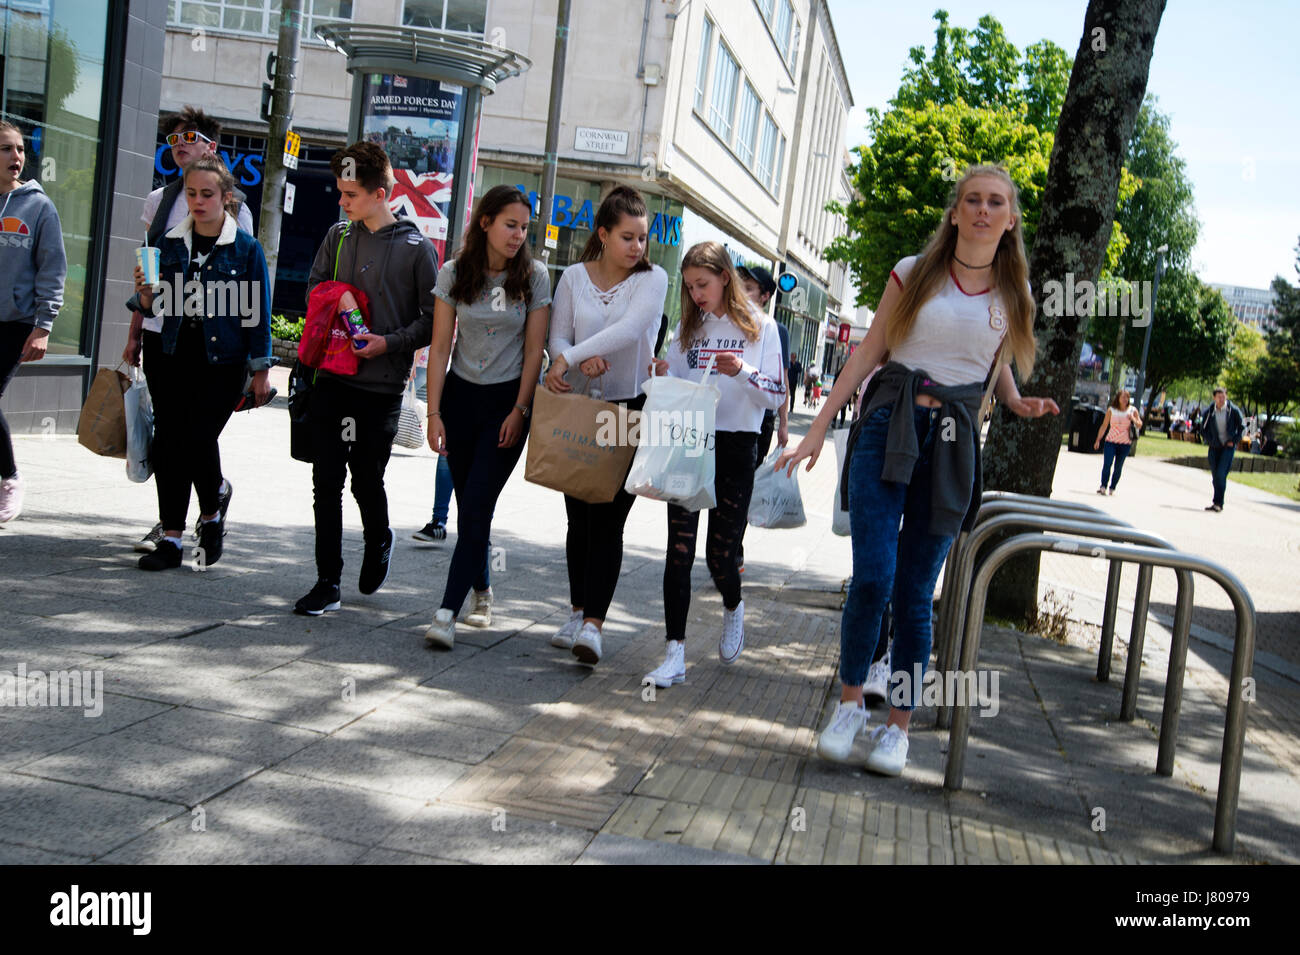 Plymouth, Devon. Royal Parade. A group of young people with shopping bags Stock Photo